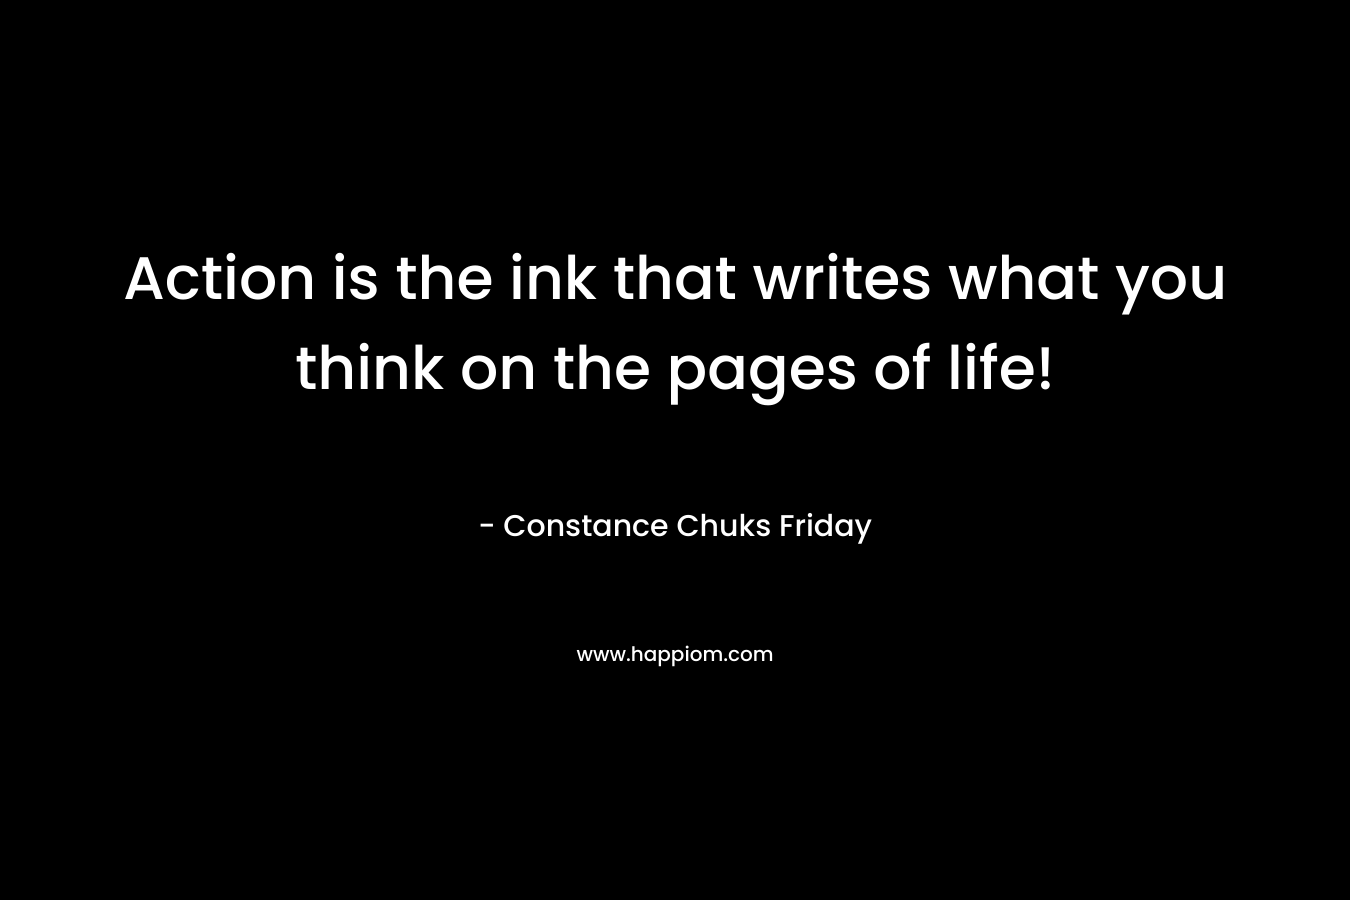 Action is the ink that writes what you think on the pages of life!